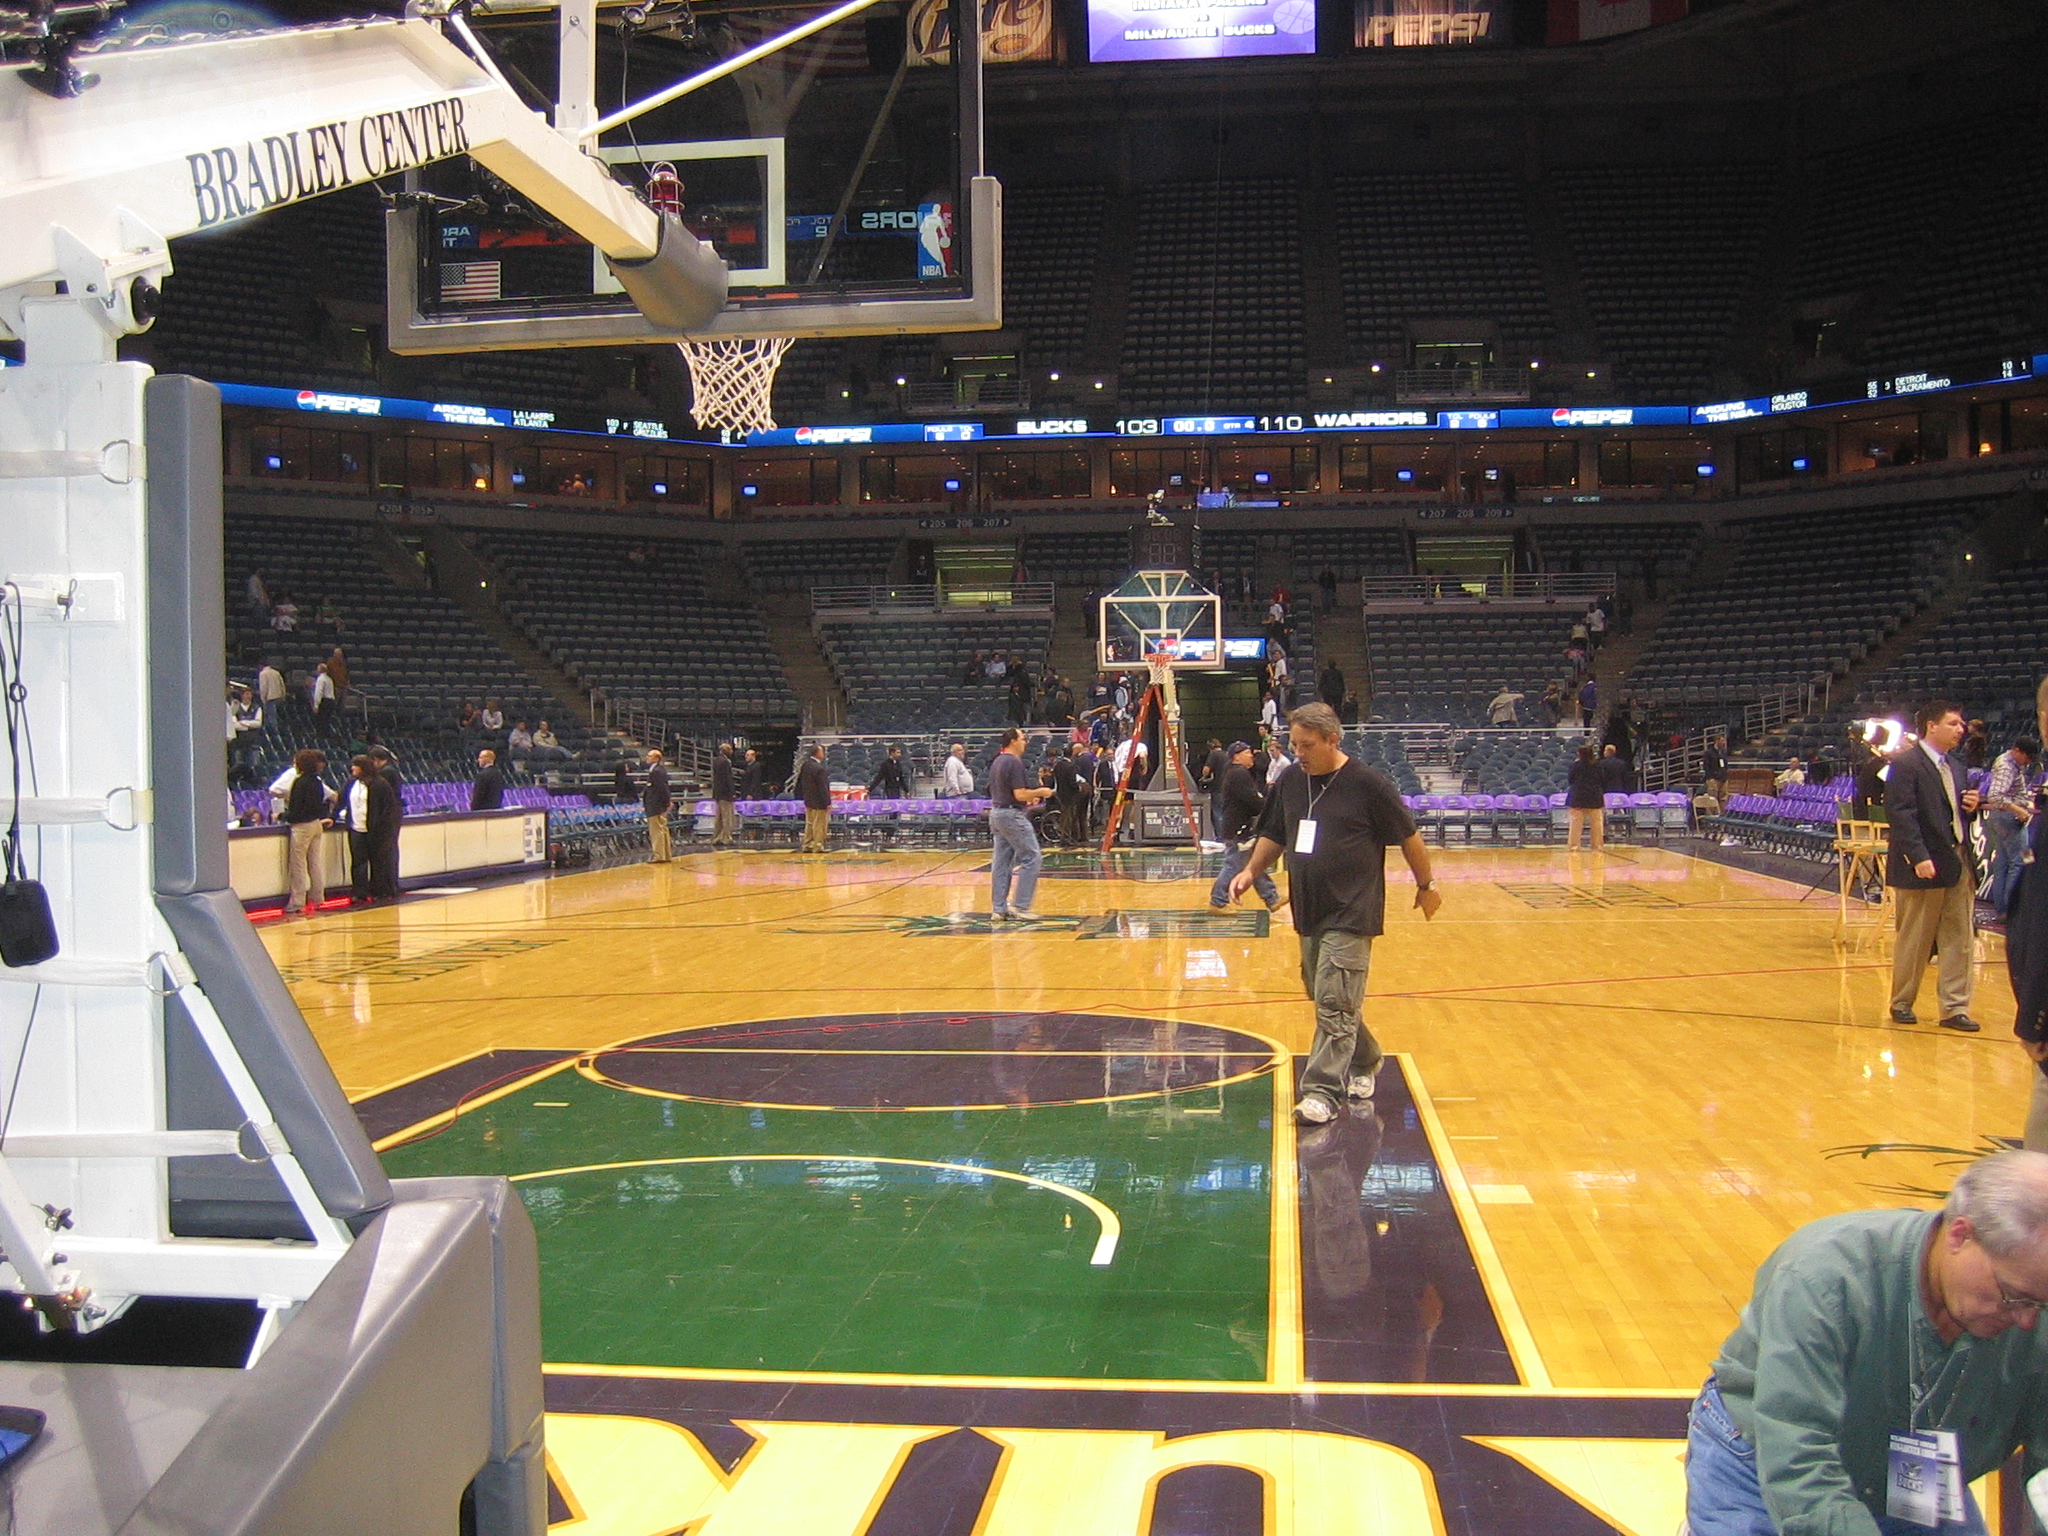 an inside basketball court is seen with players in it